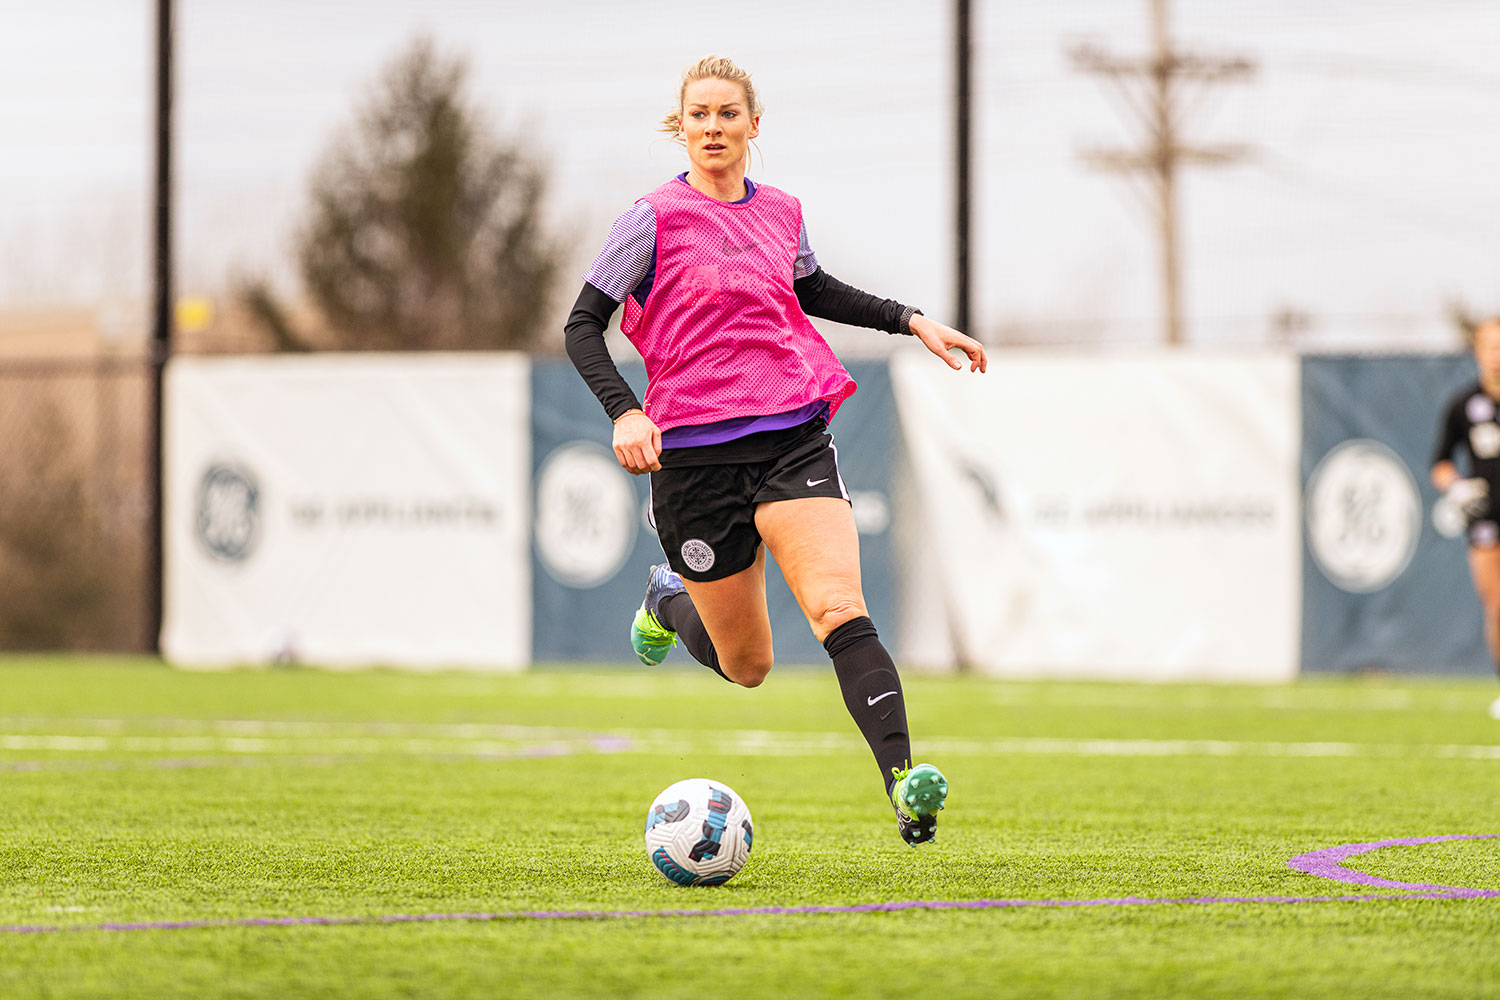 Defender Gemma Bonner training with Racing Lousivelle FC in 2022. (Conor Cunningham / Racing Louisville FC)